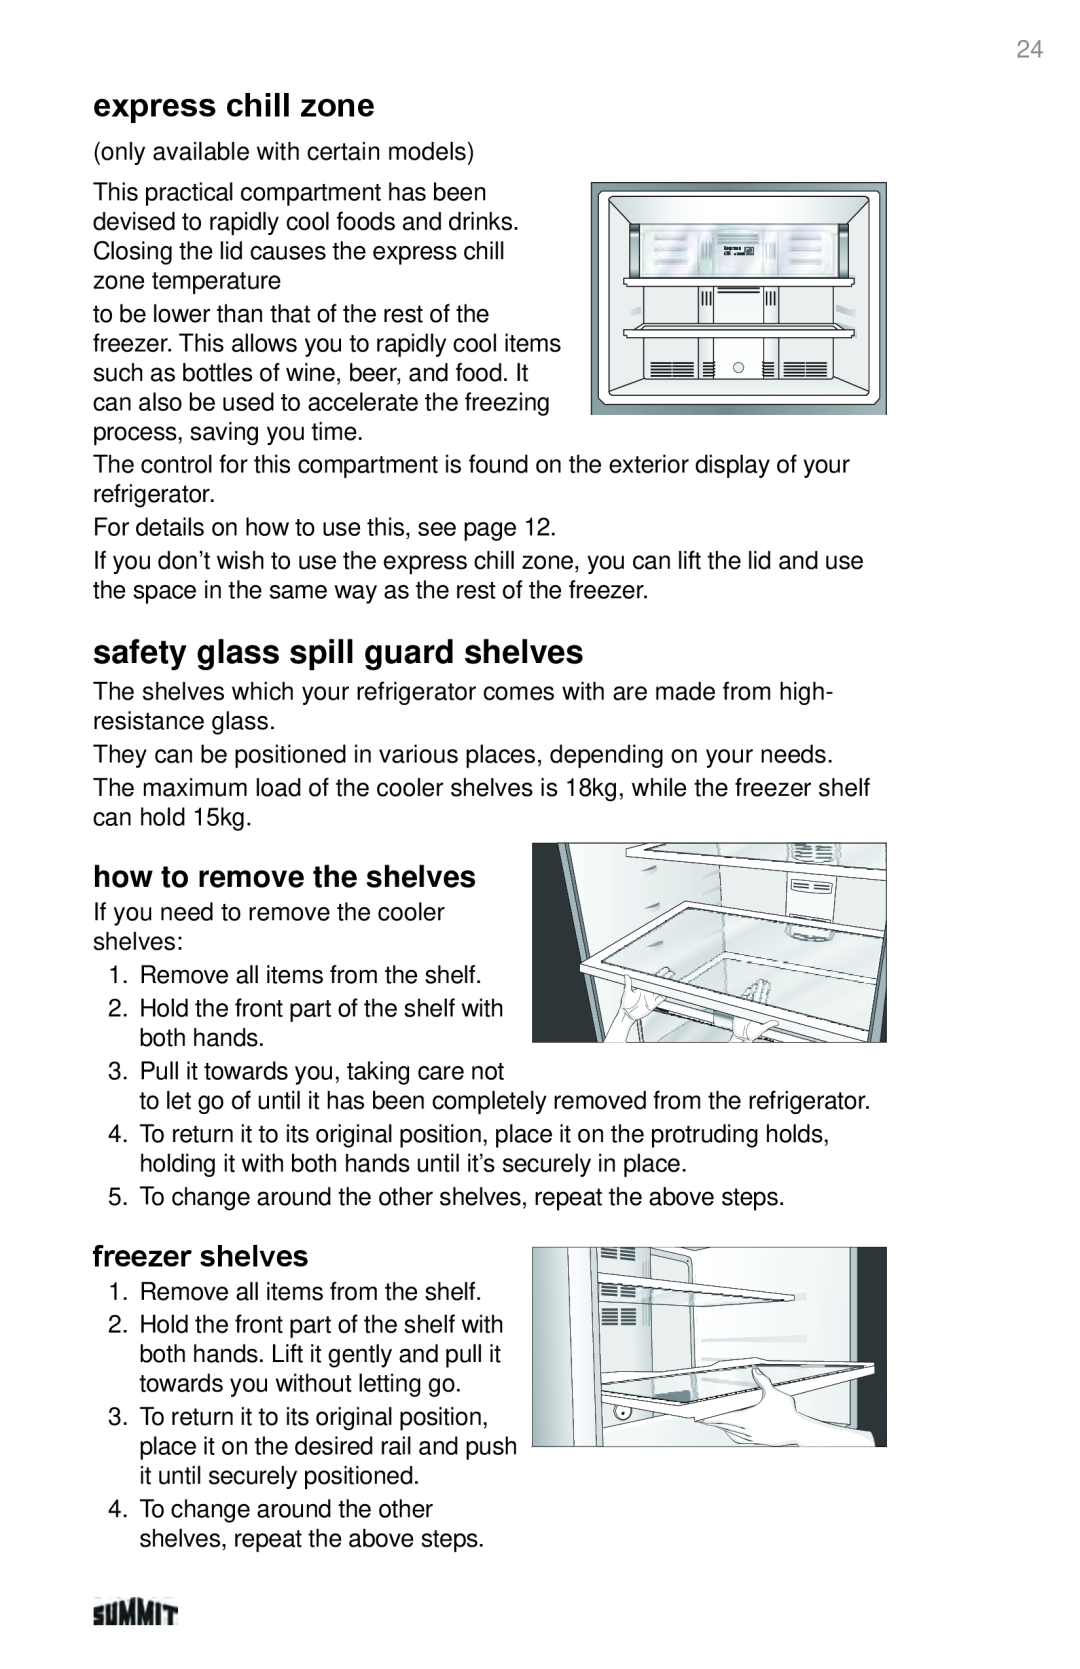 Summit 225D6783P011 manual express chill zone, safety glass spill guard shelves, how to remove the shelves, freezer shelves 